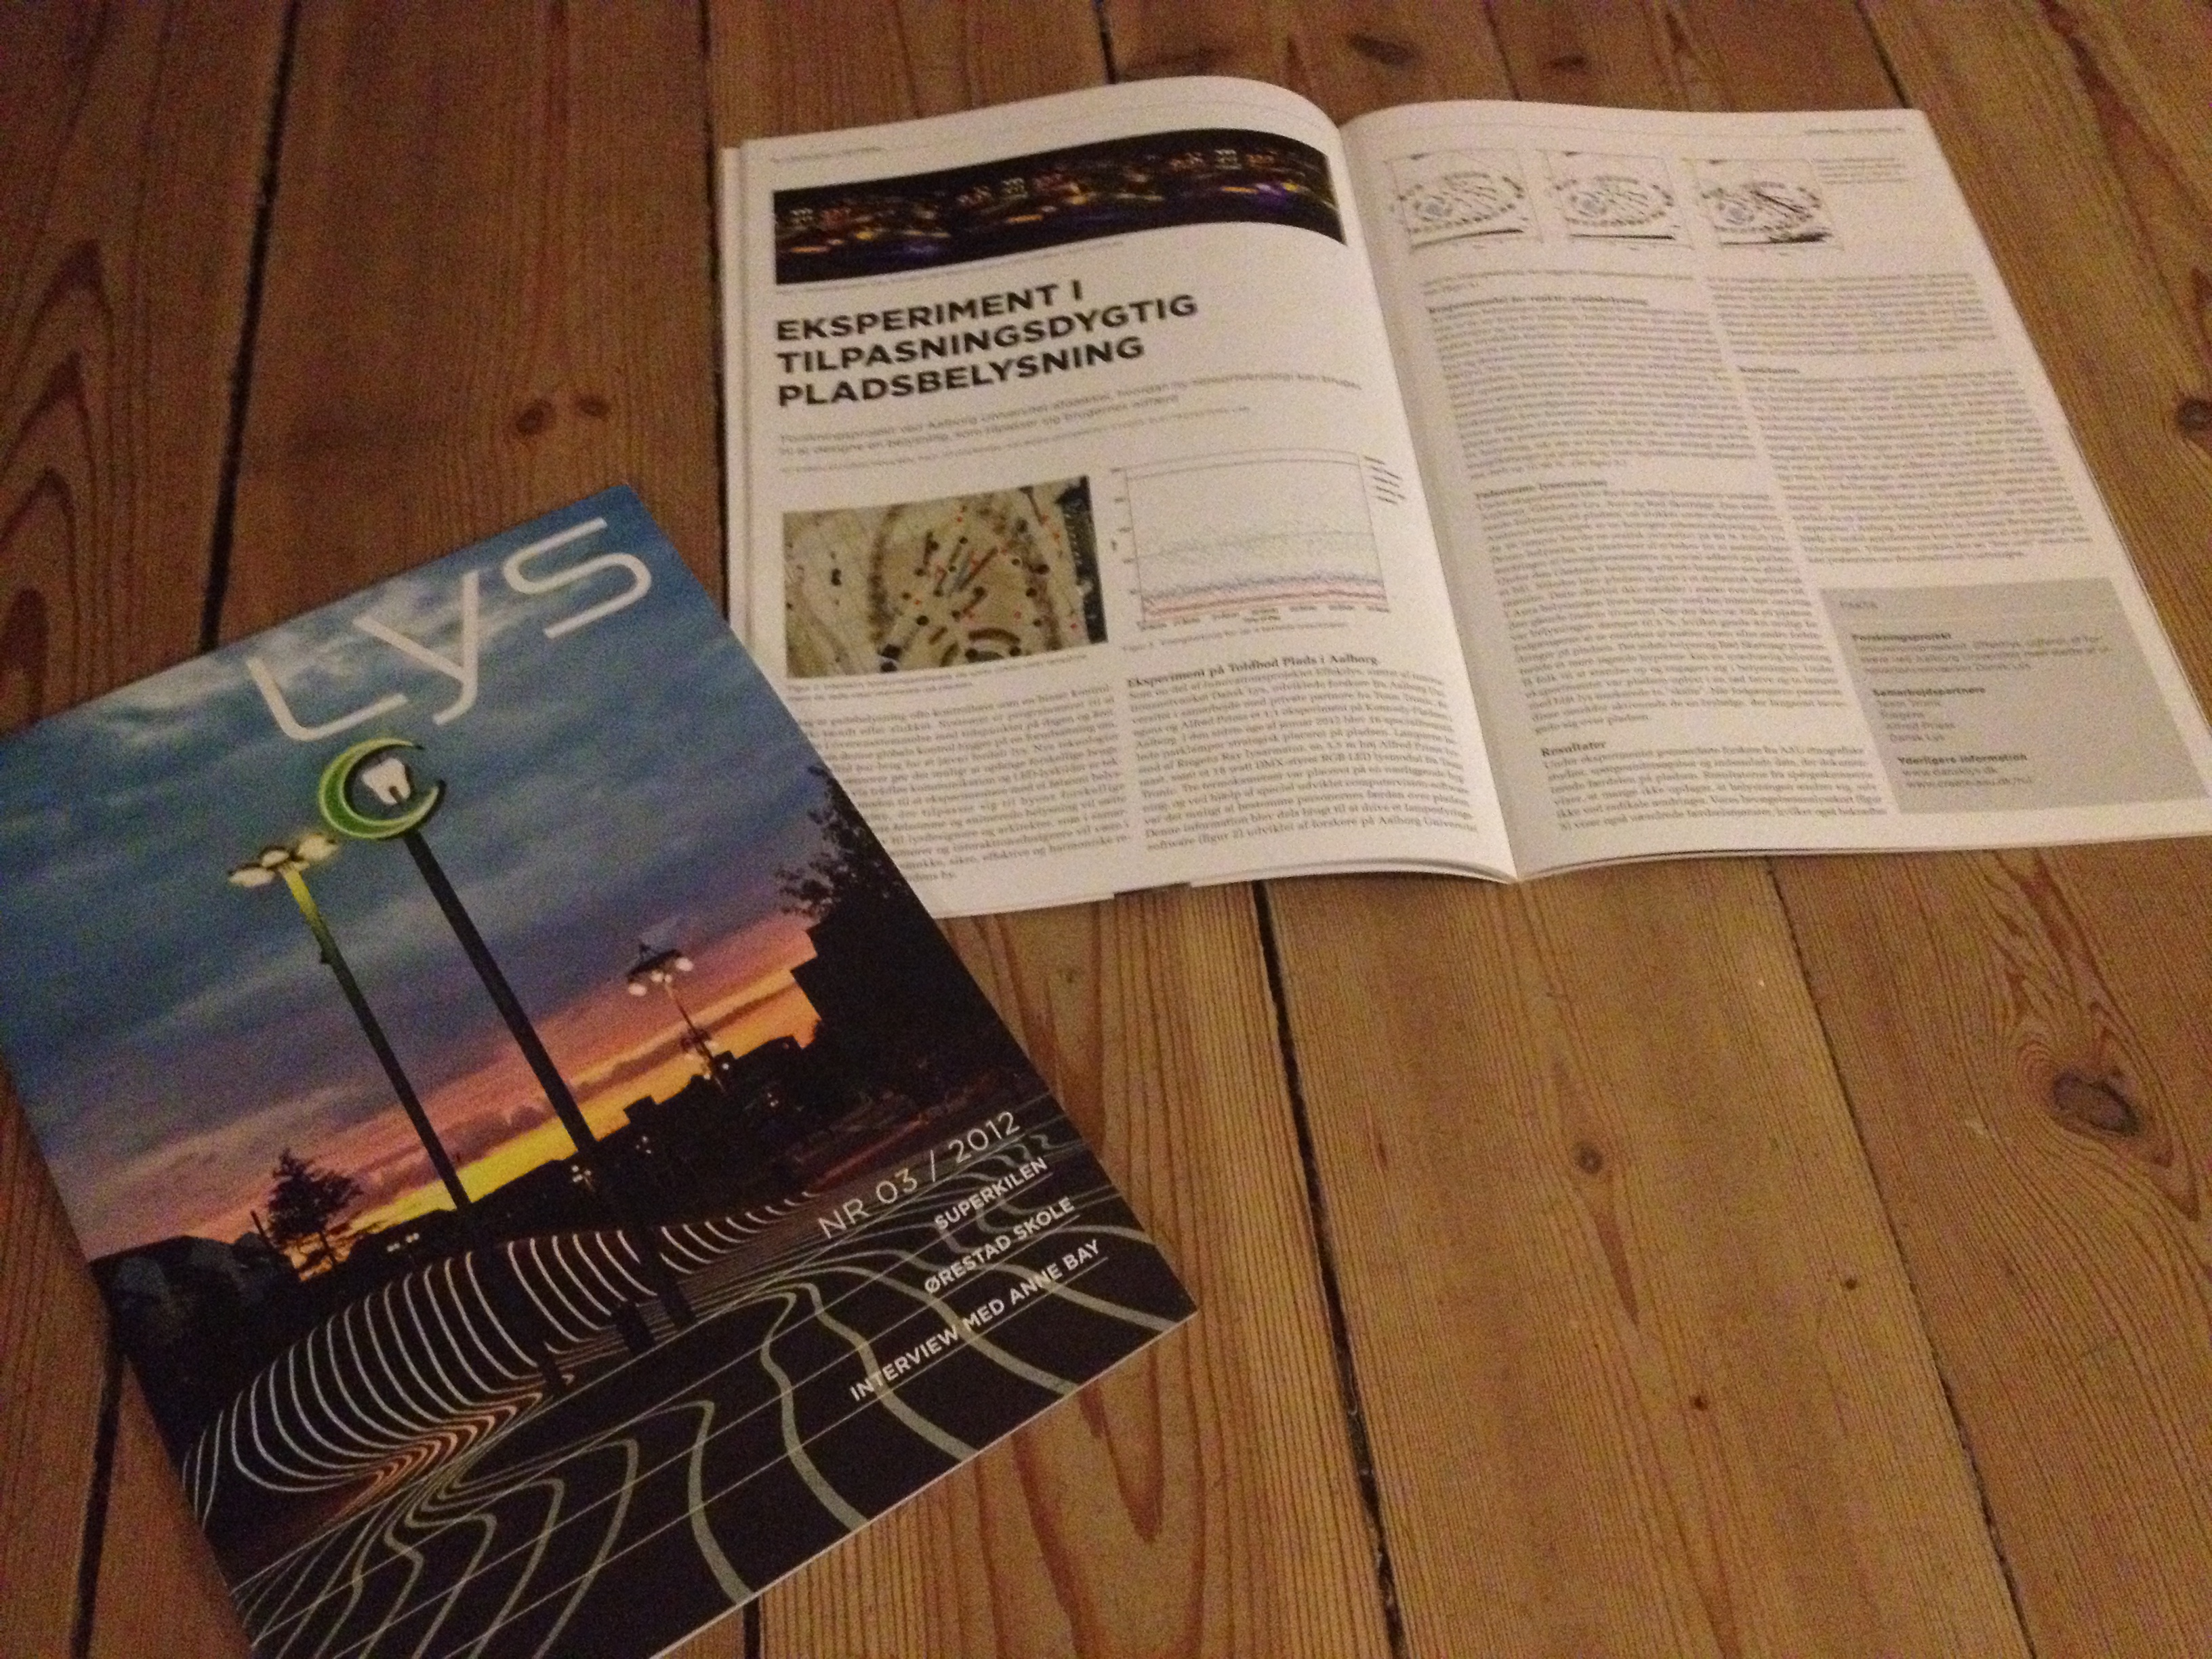 Article in the Danish Light Journal: LYS